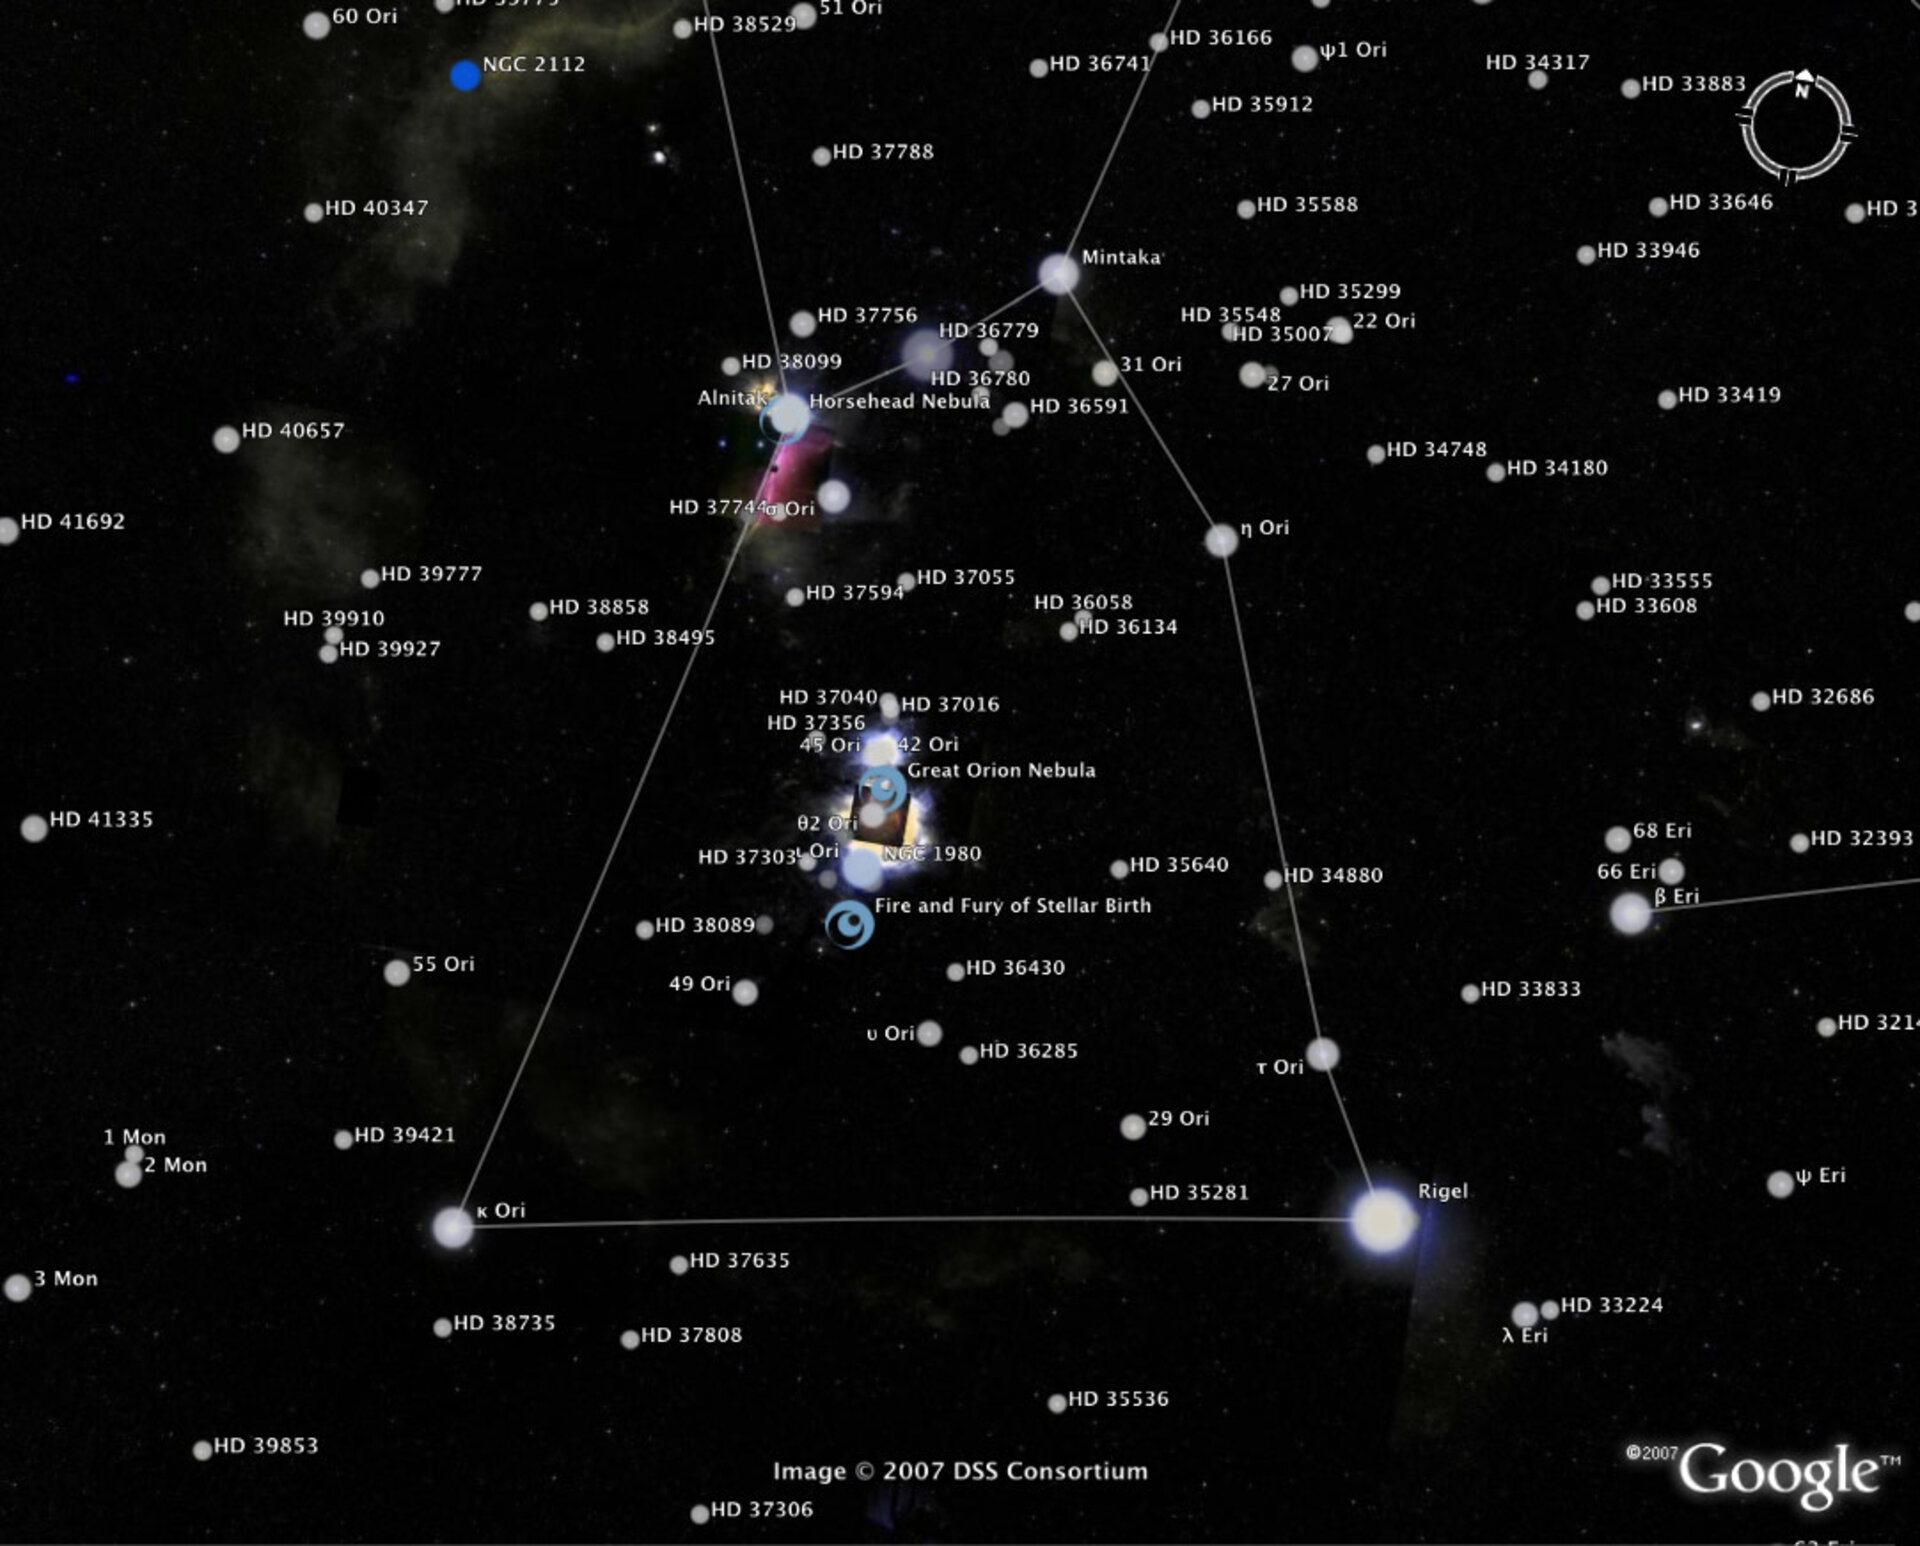 Screen capture of the Orion constellation border